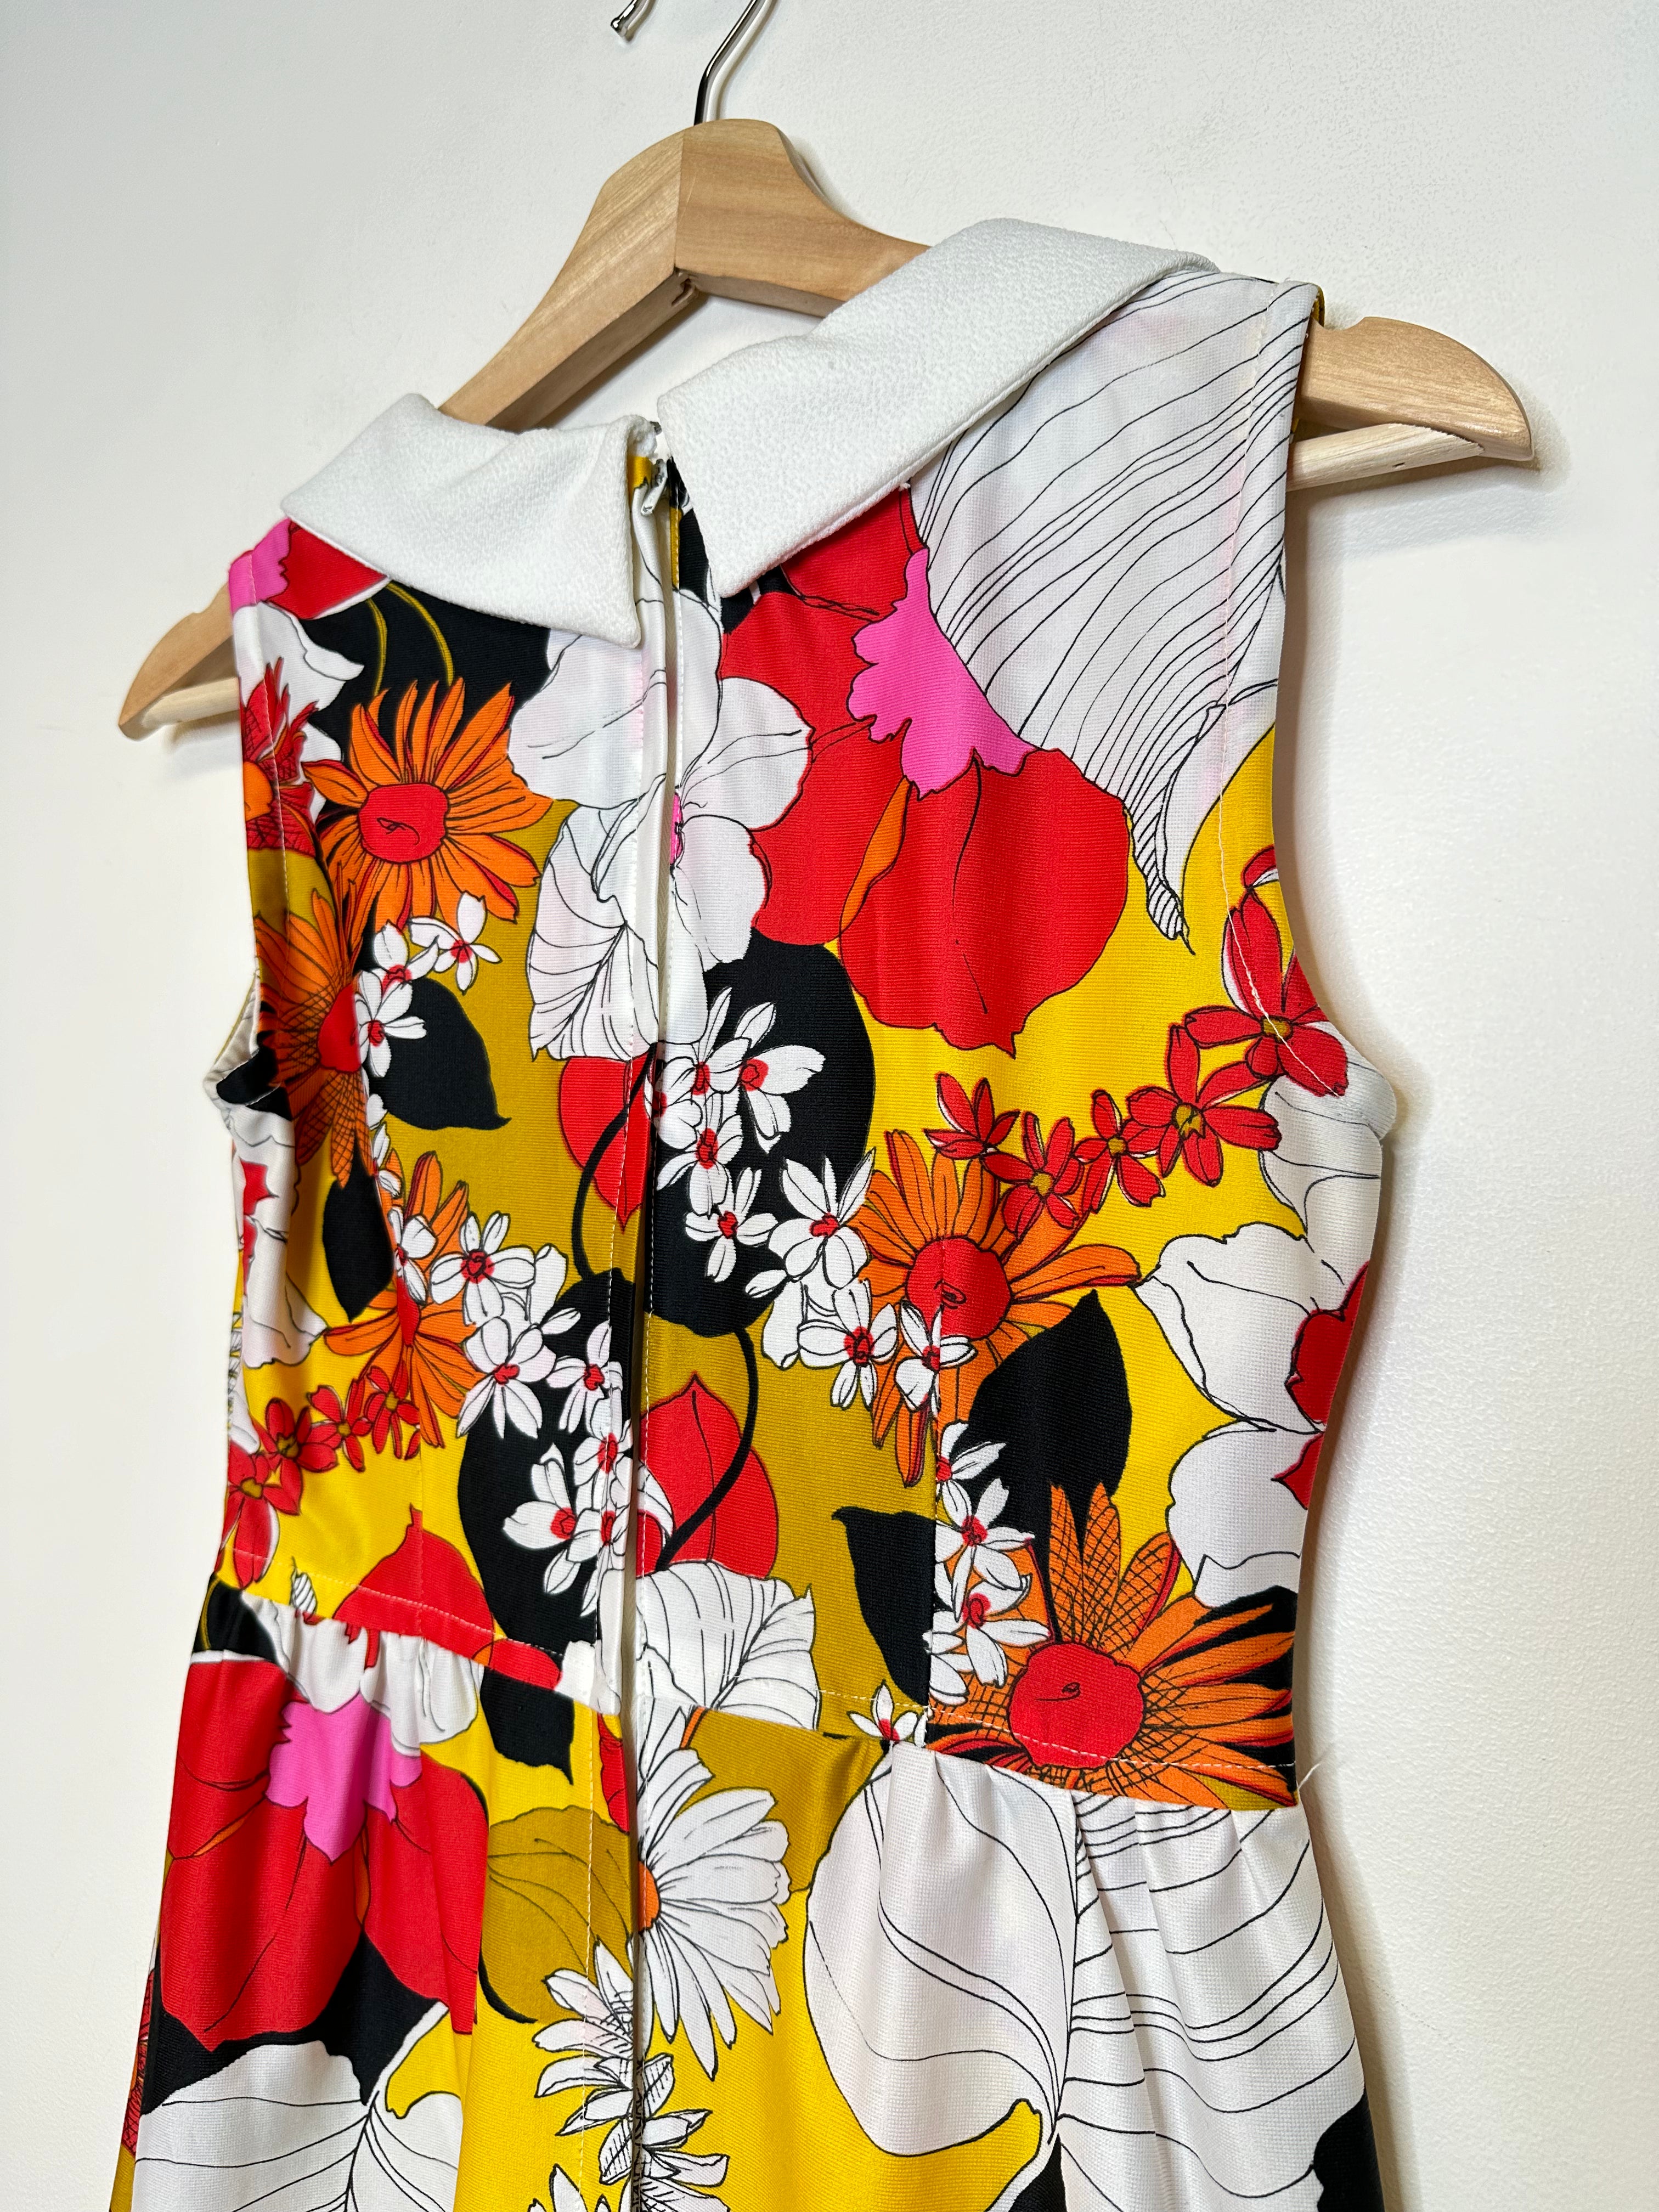 Vintage Red/Yellow Floral Dress - XS